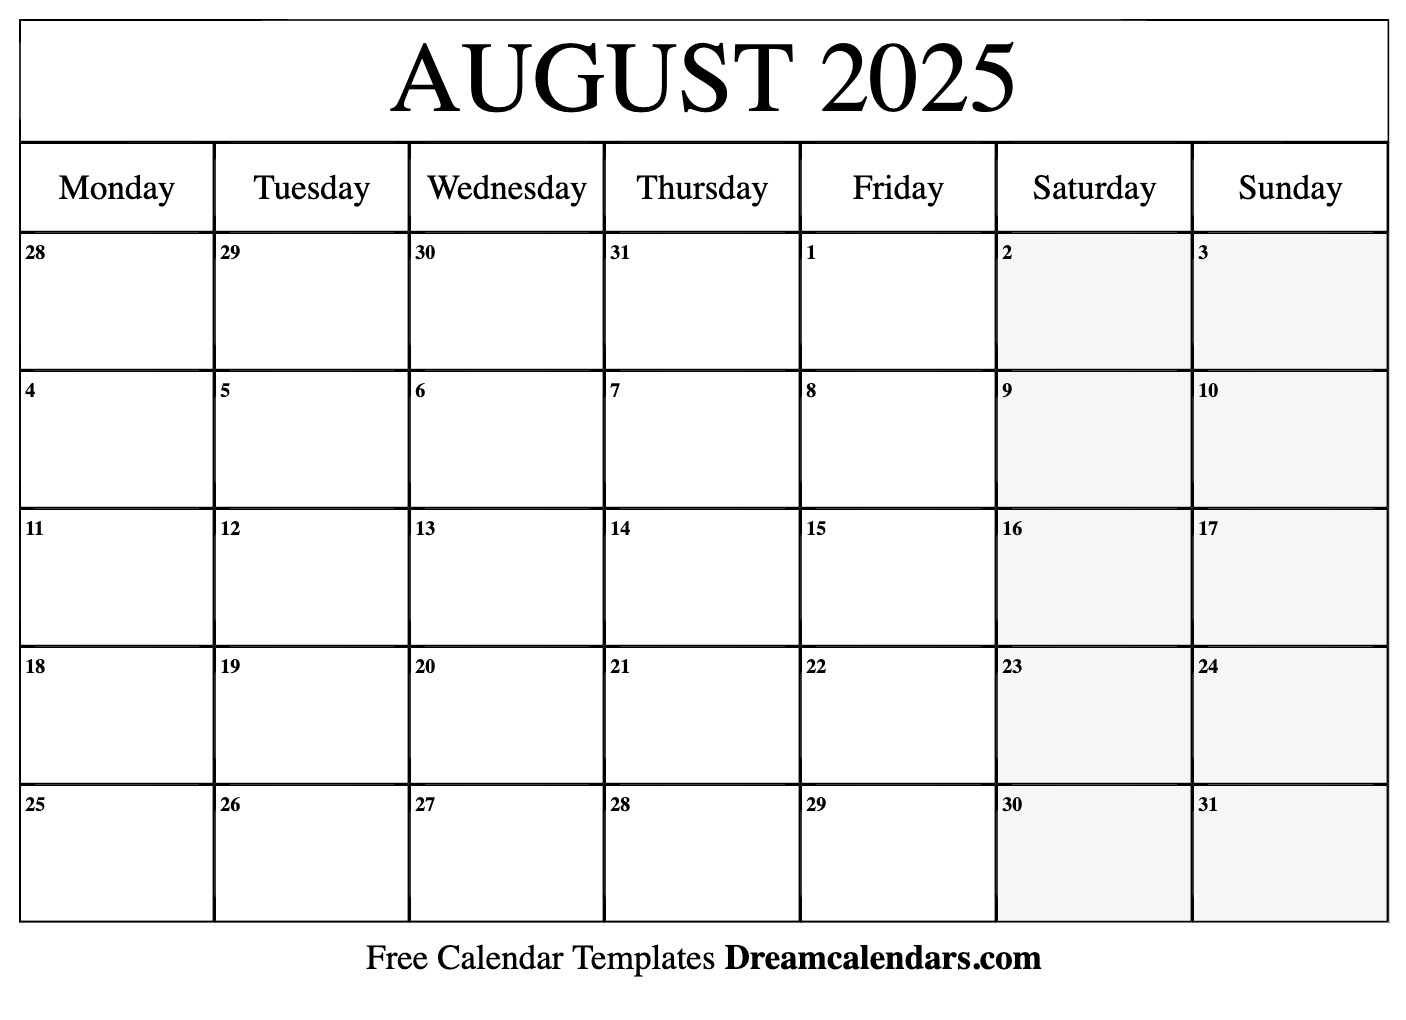 August 2025 Calendar | Free Blank Printable With Holidays regarding Free Printable Calendar August 2024-May 2025